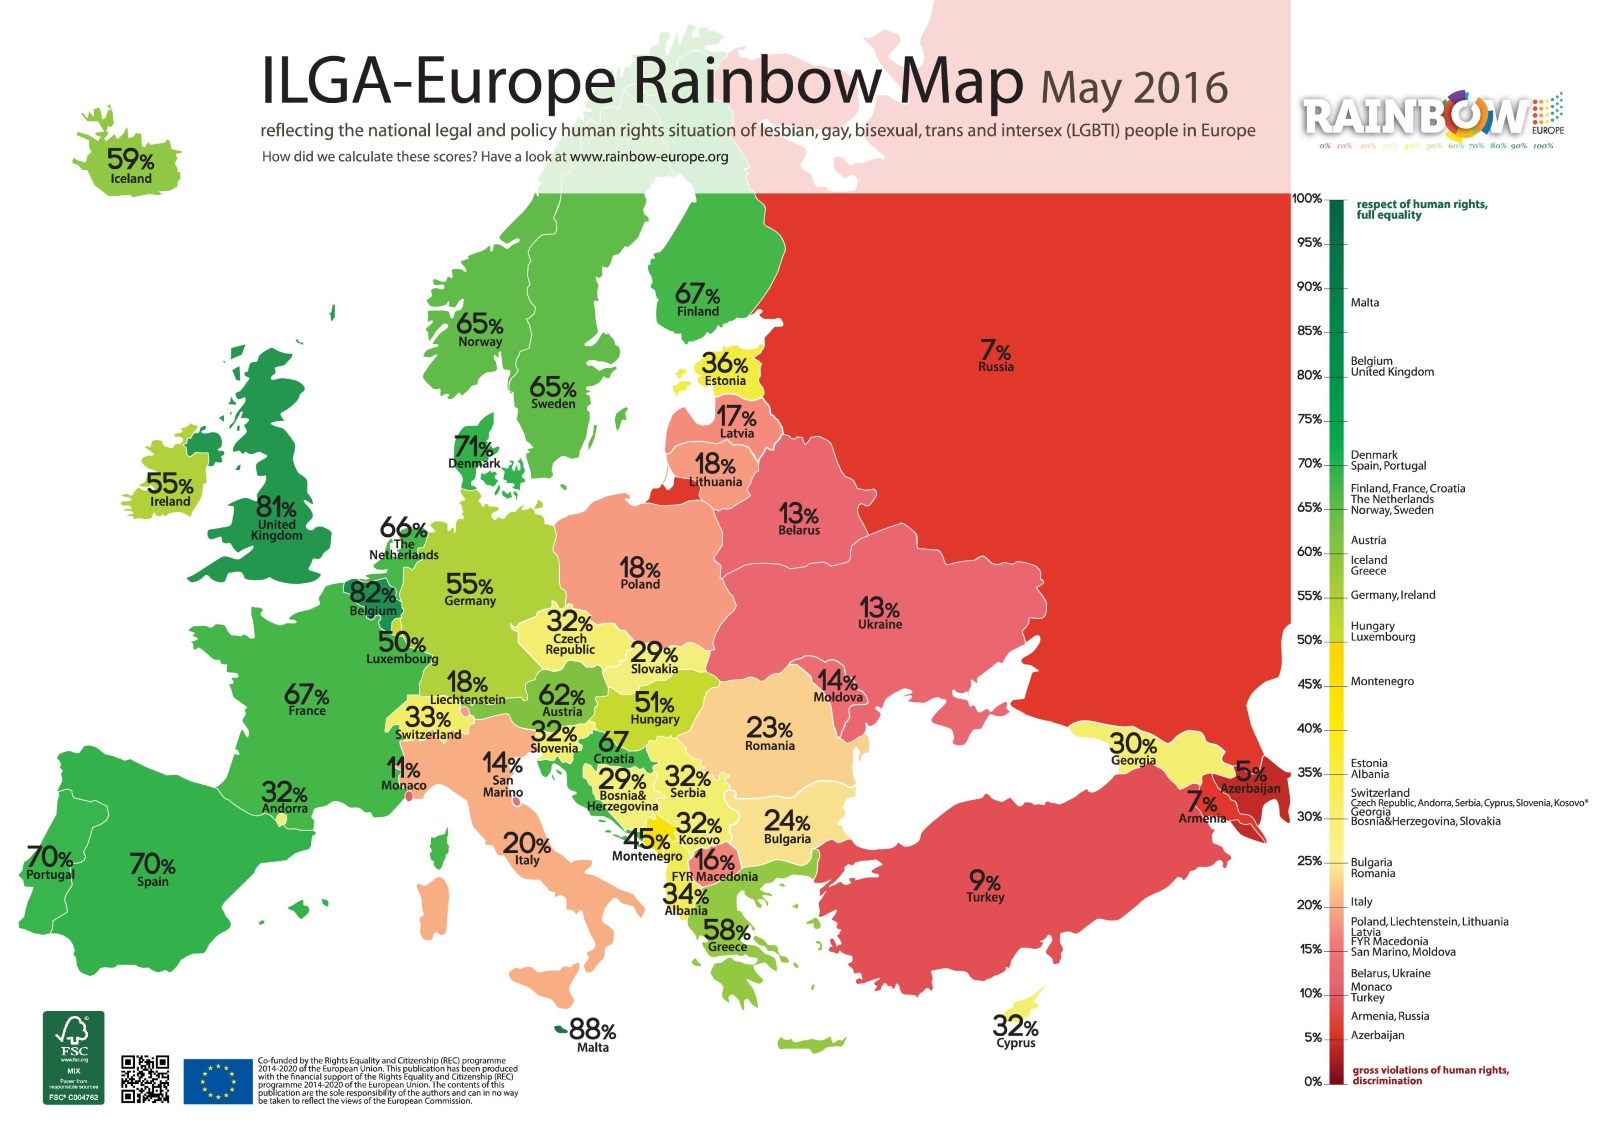 Index claims Latvia the worst place to be gay in EU / Article / 0